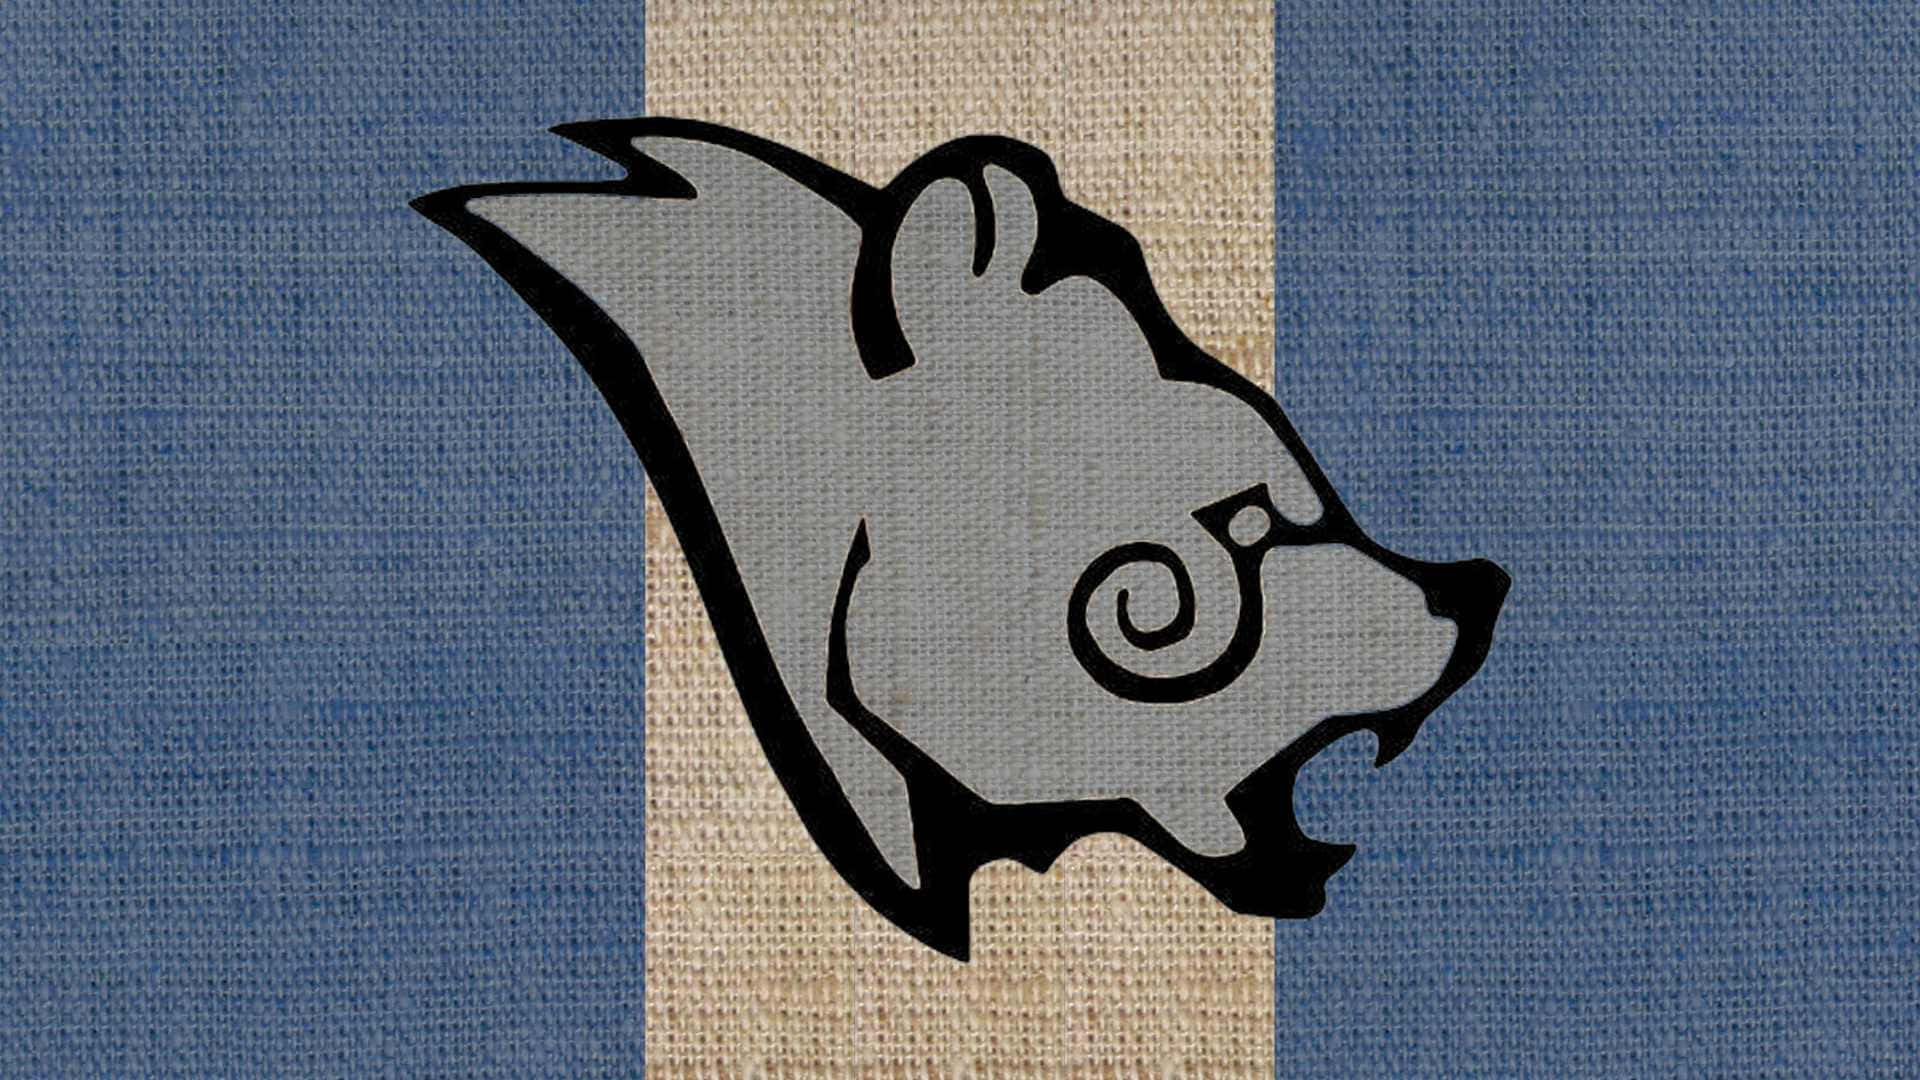 A Bear Head On A Blue And White Striped Background